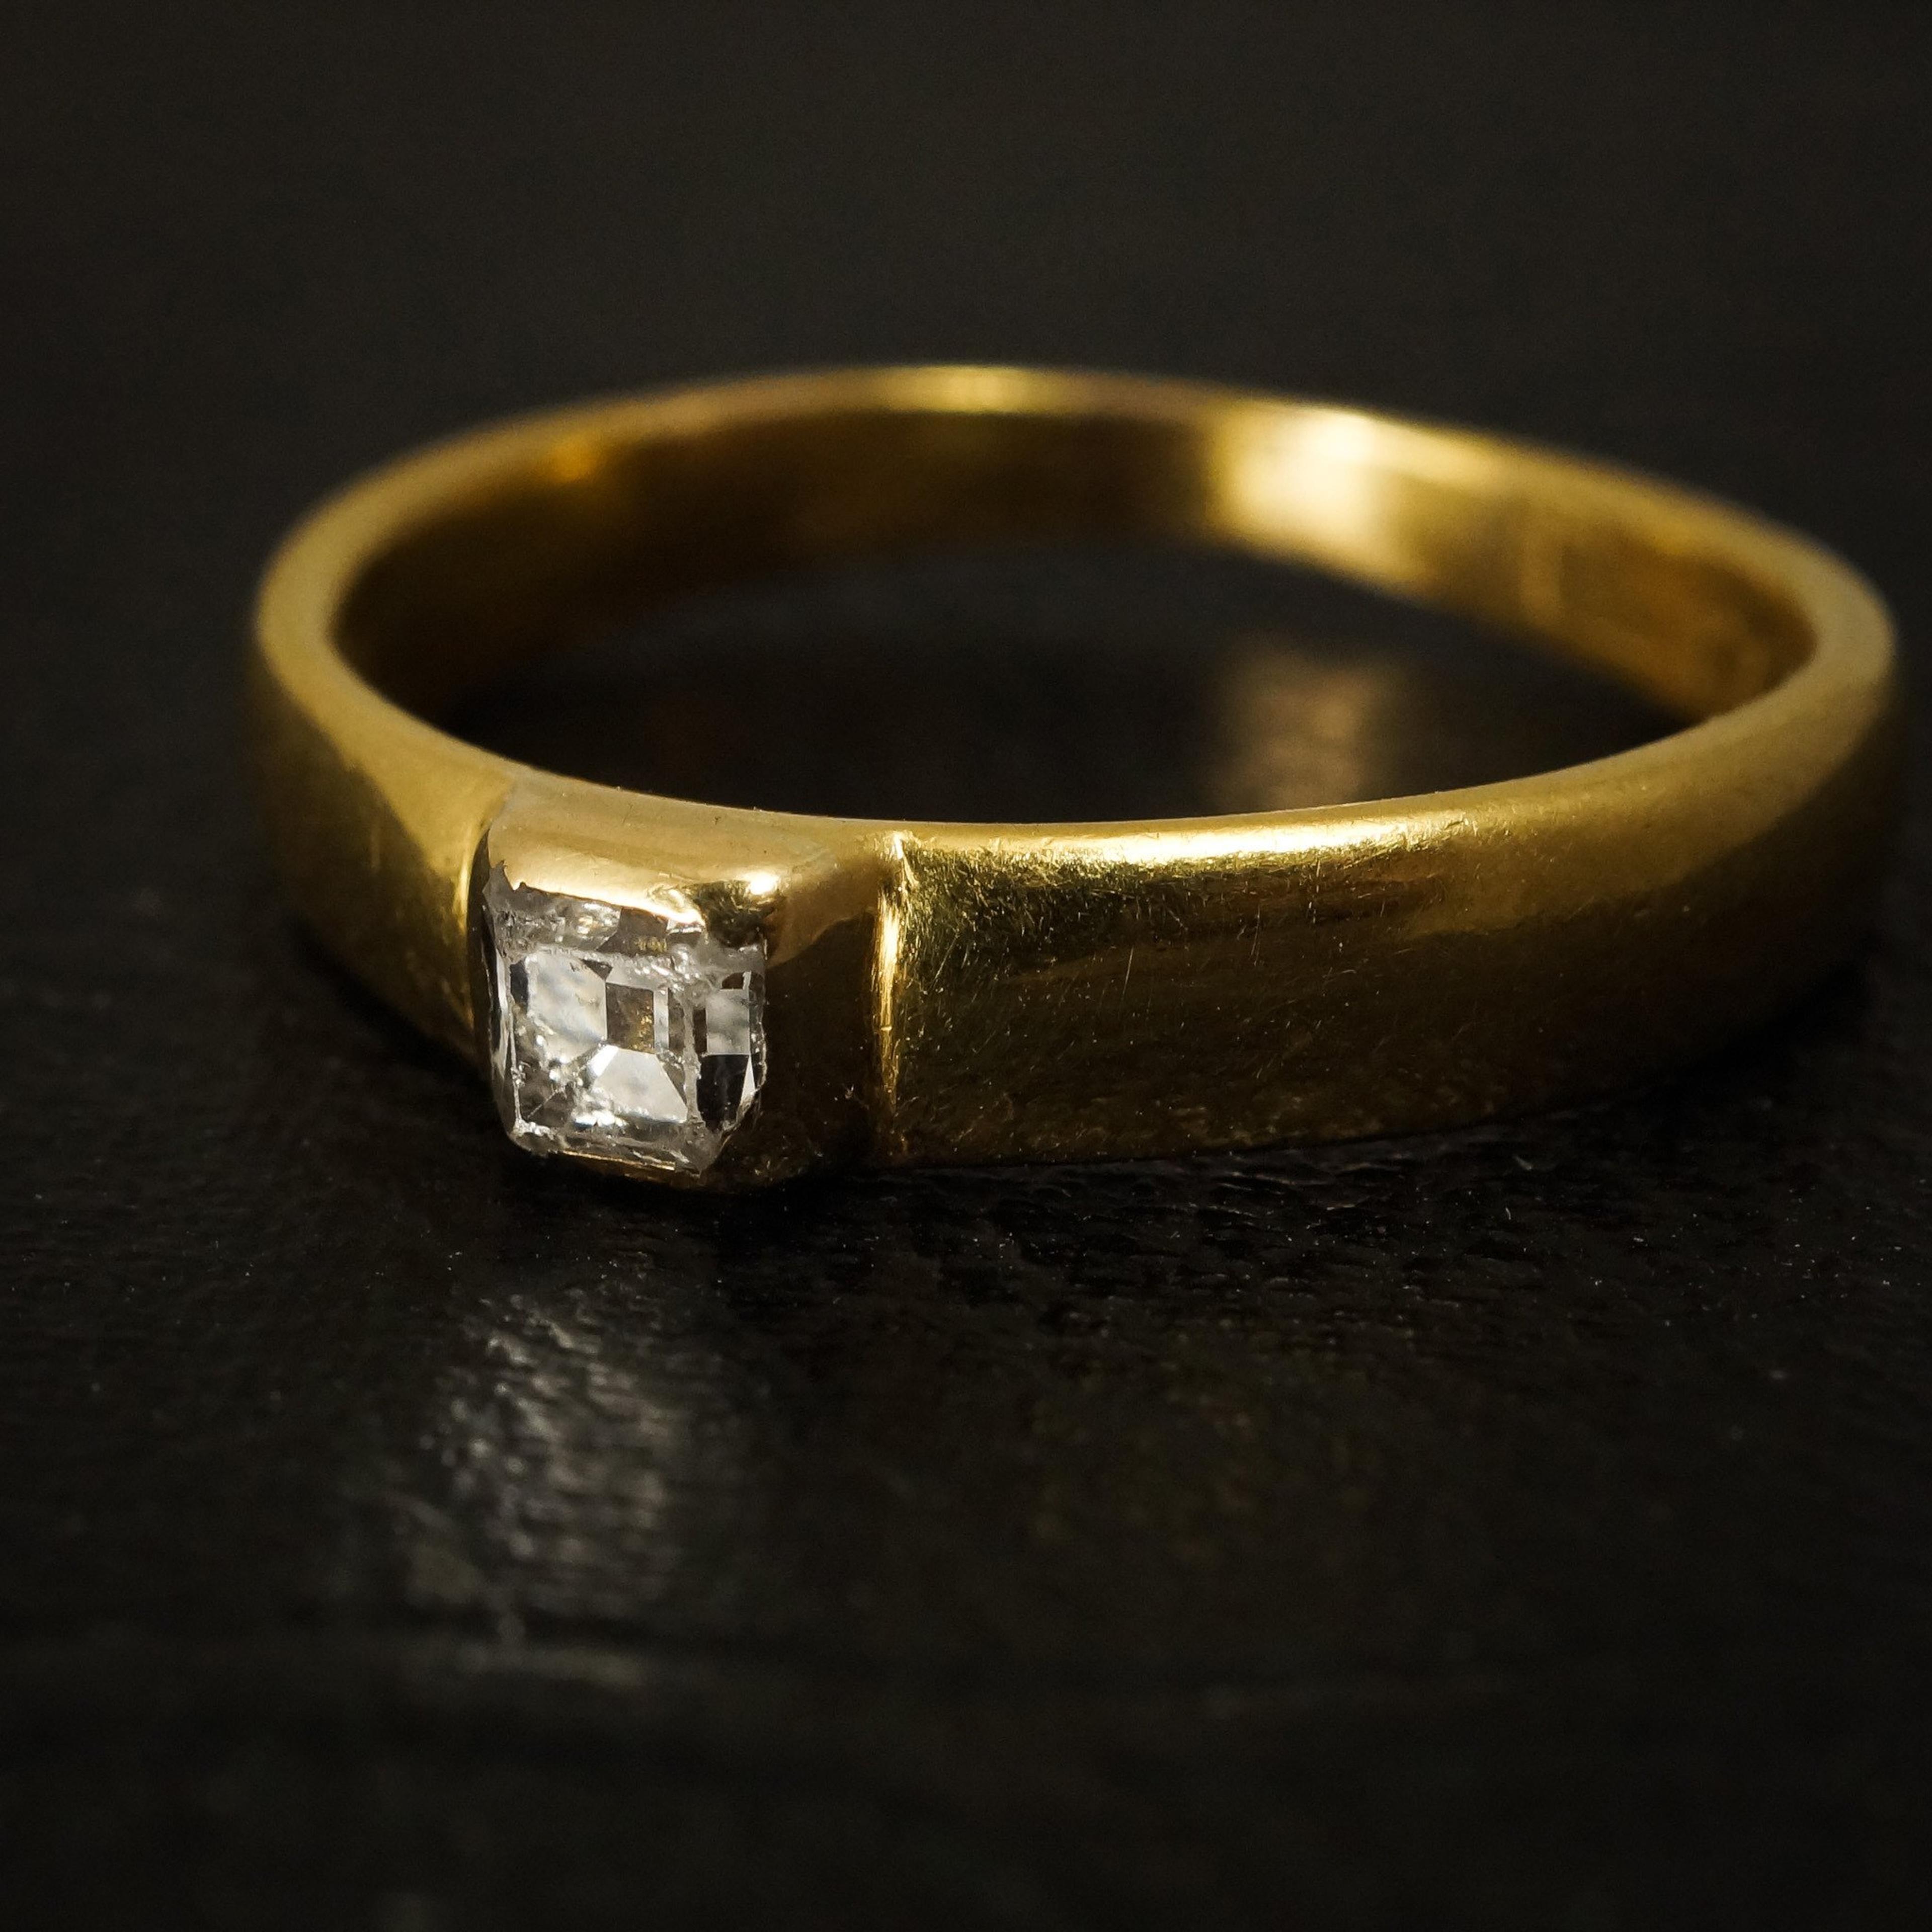 Detail of "Erunt Duom Carne Una" Early 17th Century Poesy Ring with Table Cut Diamond